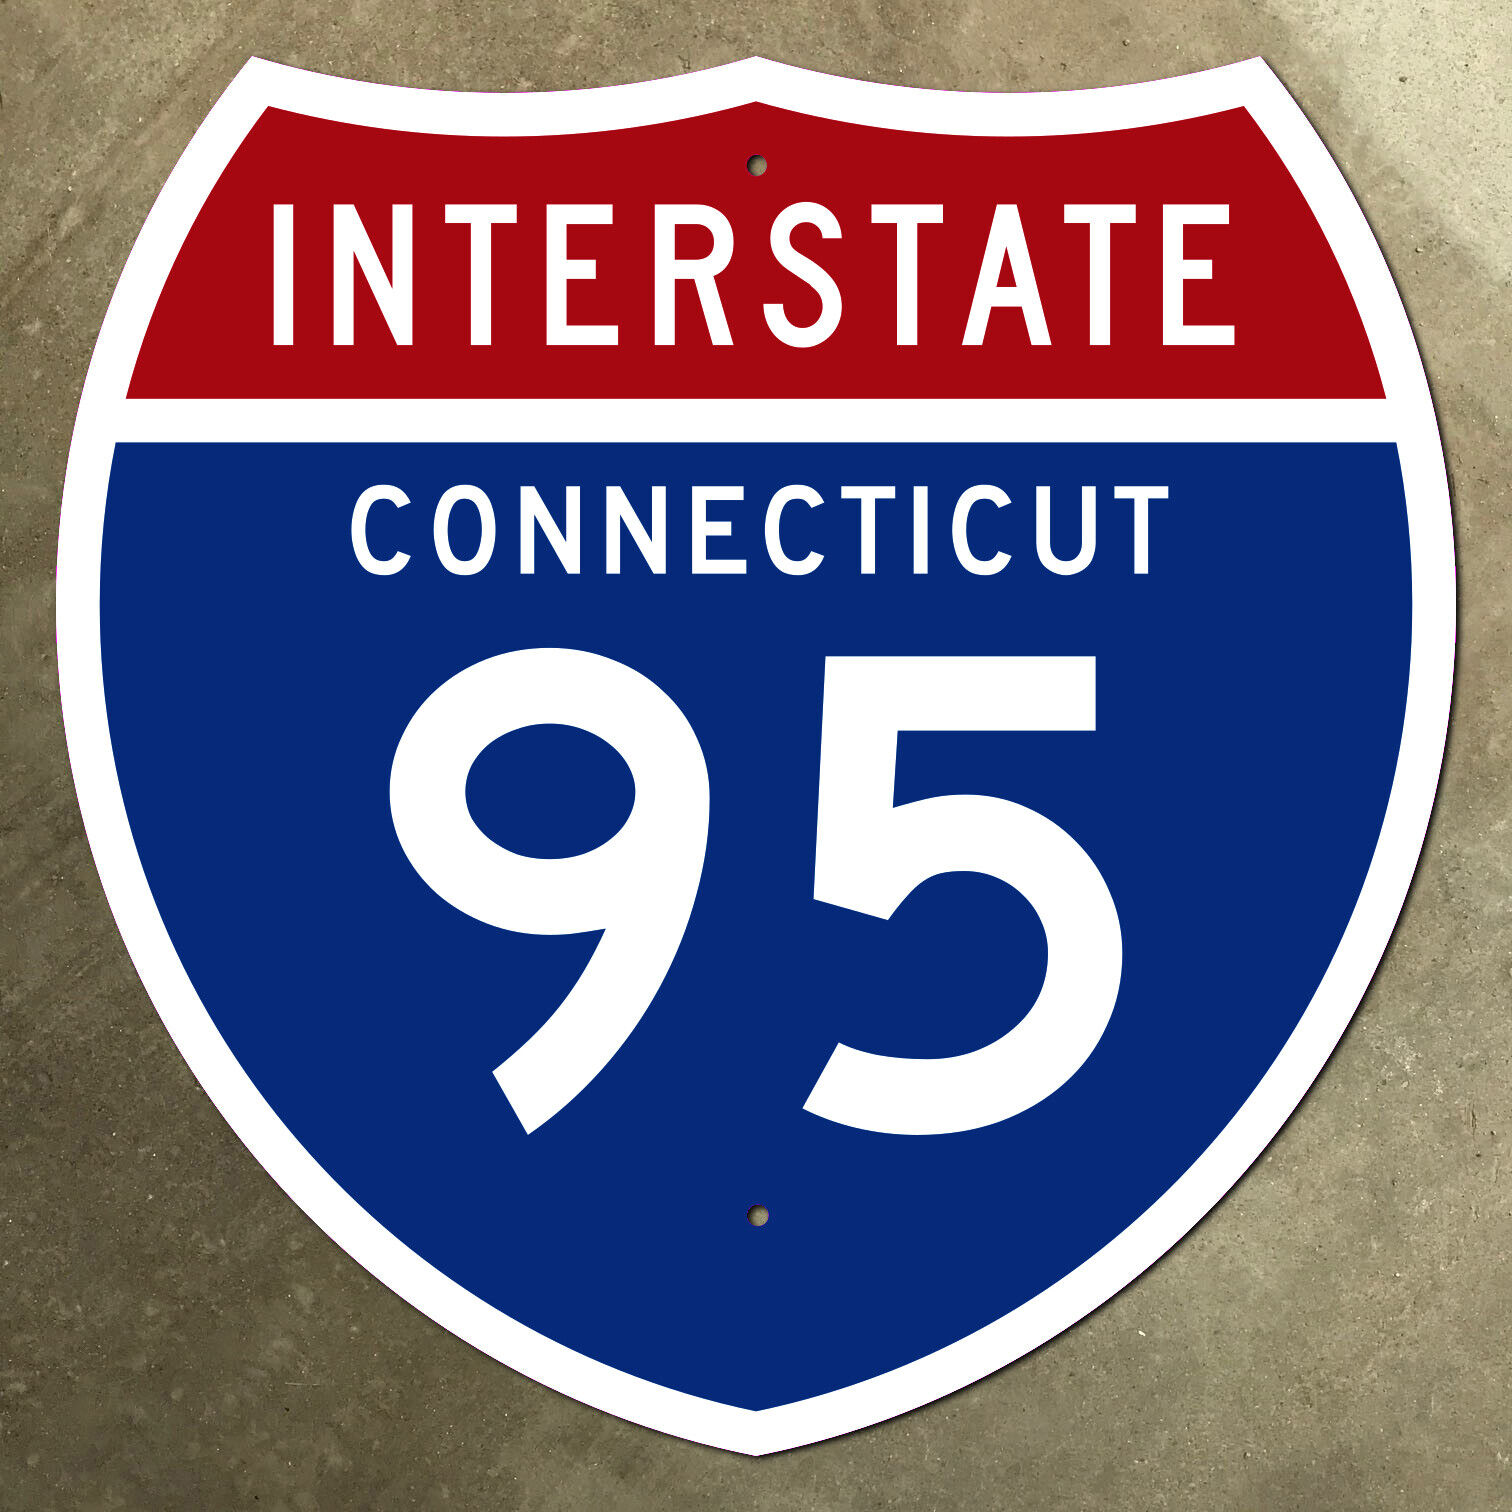 Connecticut interstate route 95 highway marker road sign 1957 New Haven 18x18